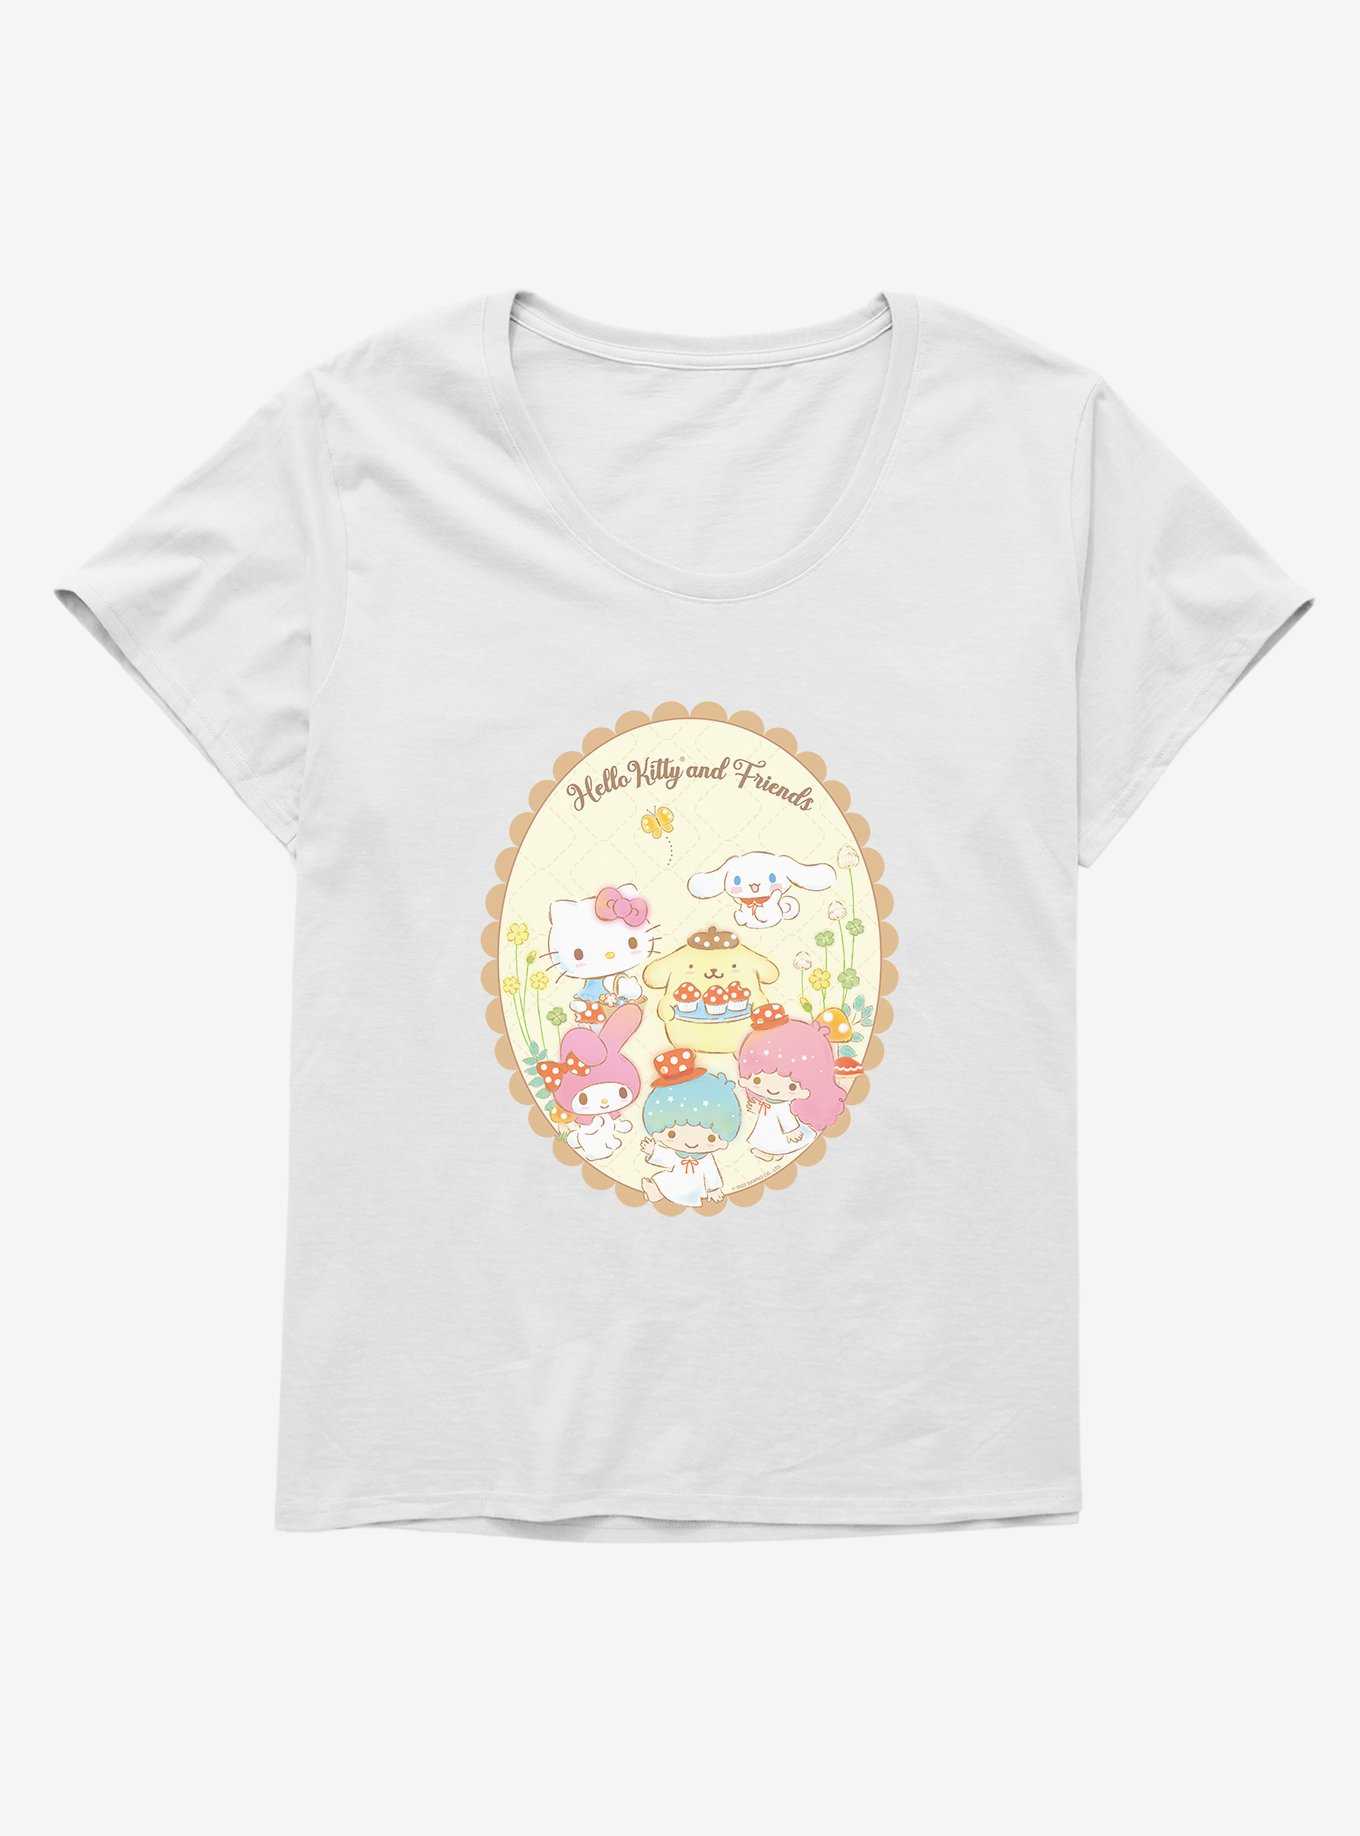 Hello Kitty And Friends Mushroom Cupcakes Girls T-Shirt Plus Size, , hi-res